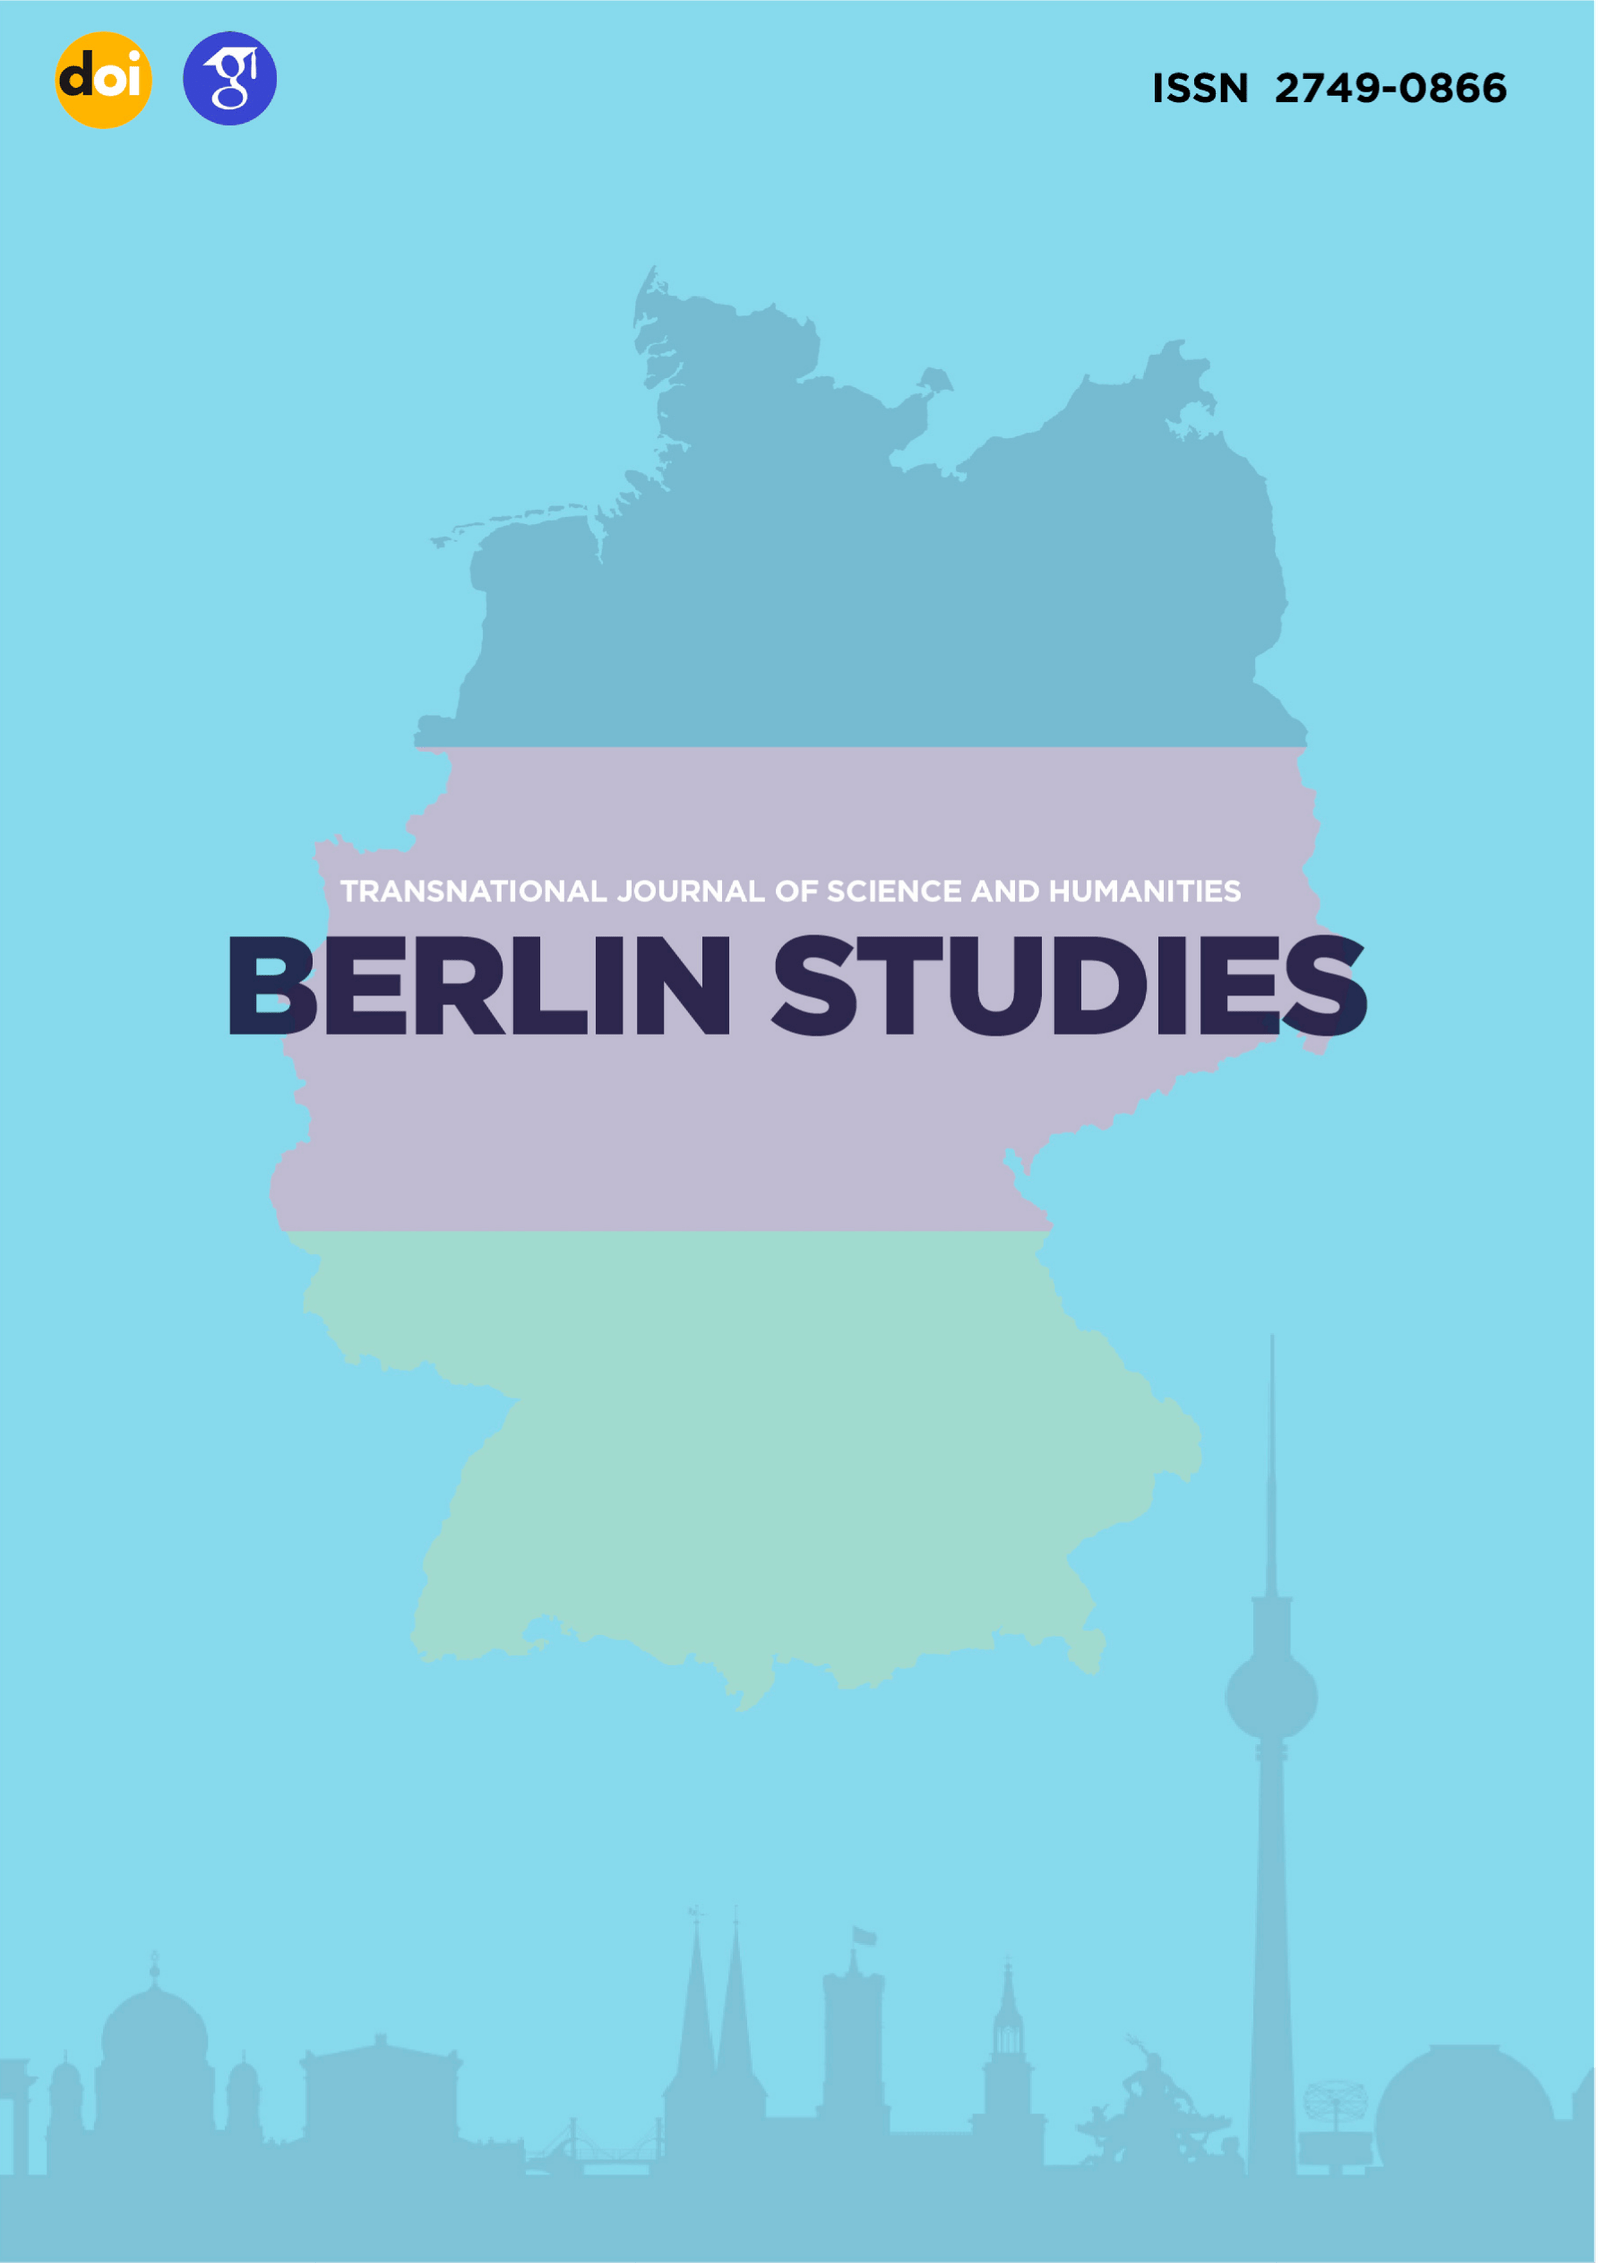 					View Vol. 3 No. 1.9 Psychological sciences (2023): Berlin Studies Transnational Journal of Science and Humanities
				